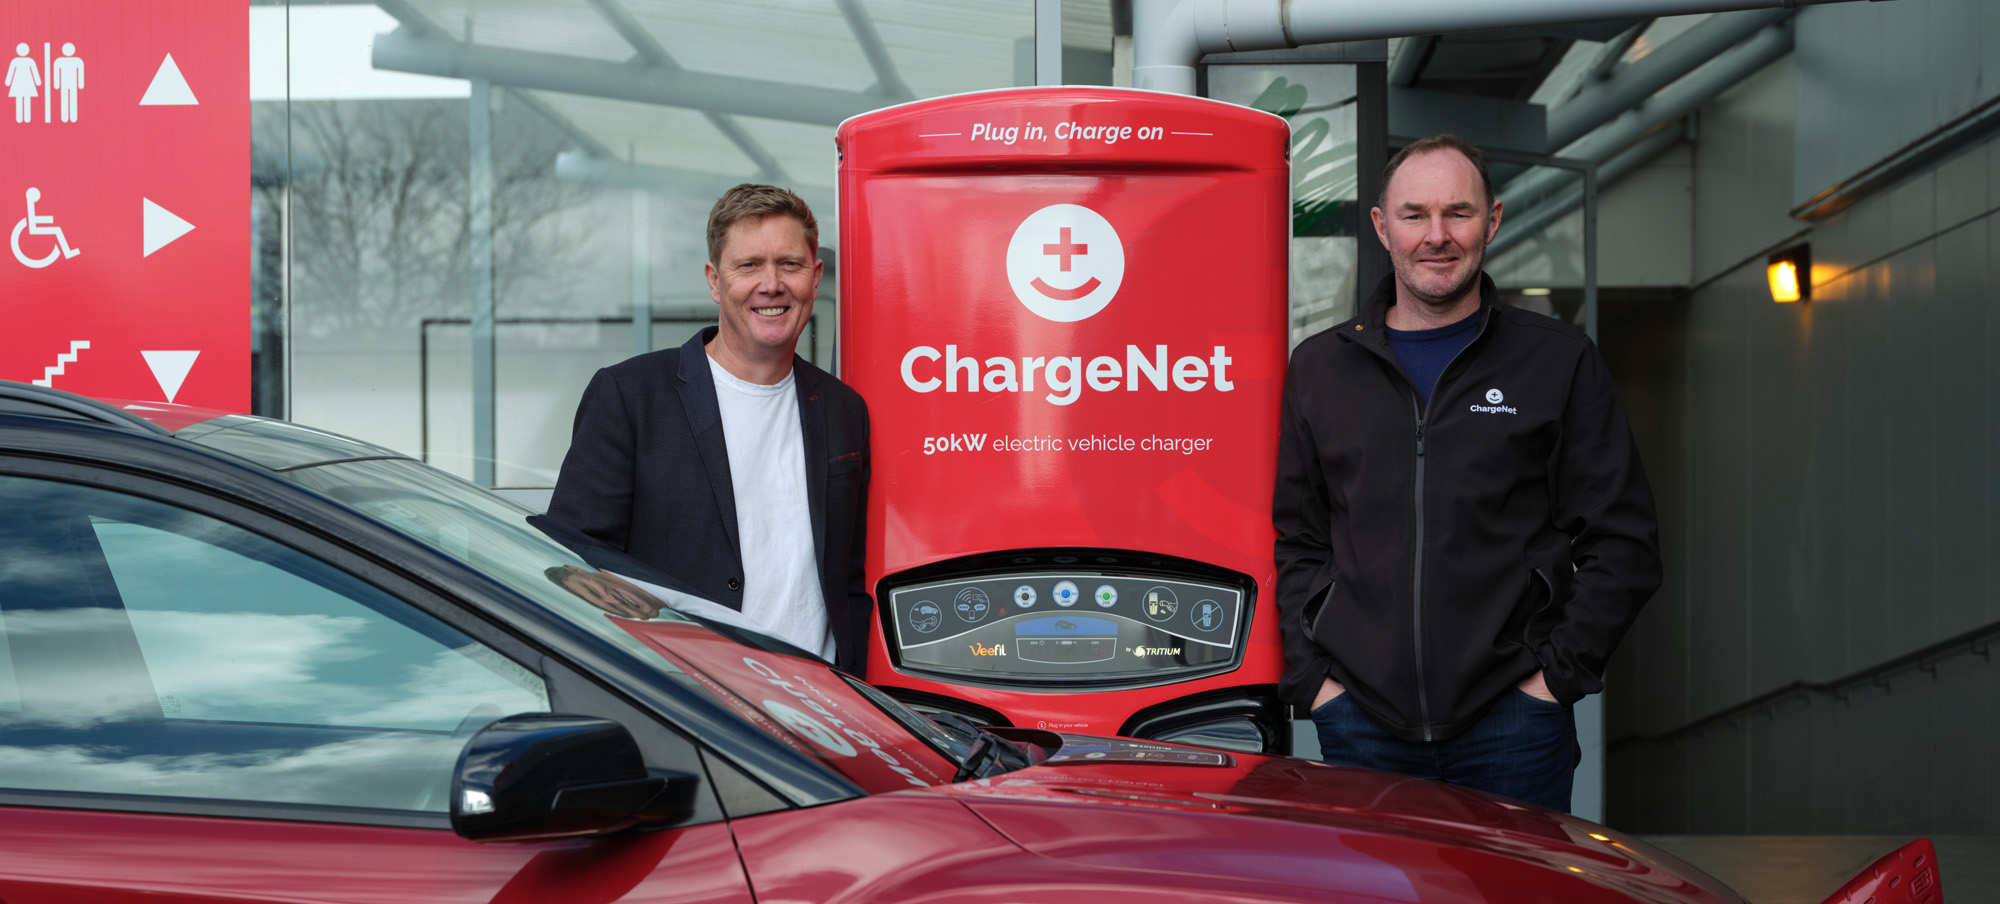 ChargeNet and AA Smartfuel partnership delivers highly charged benefits to EV drivers